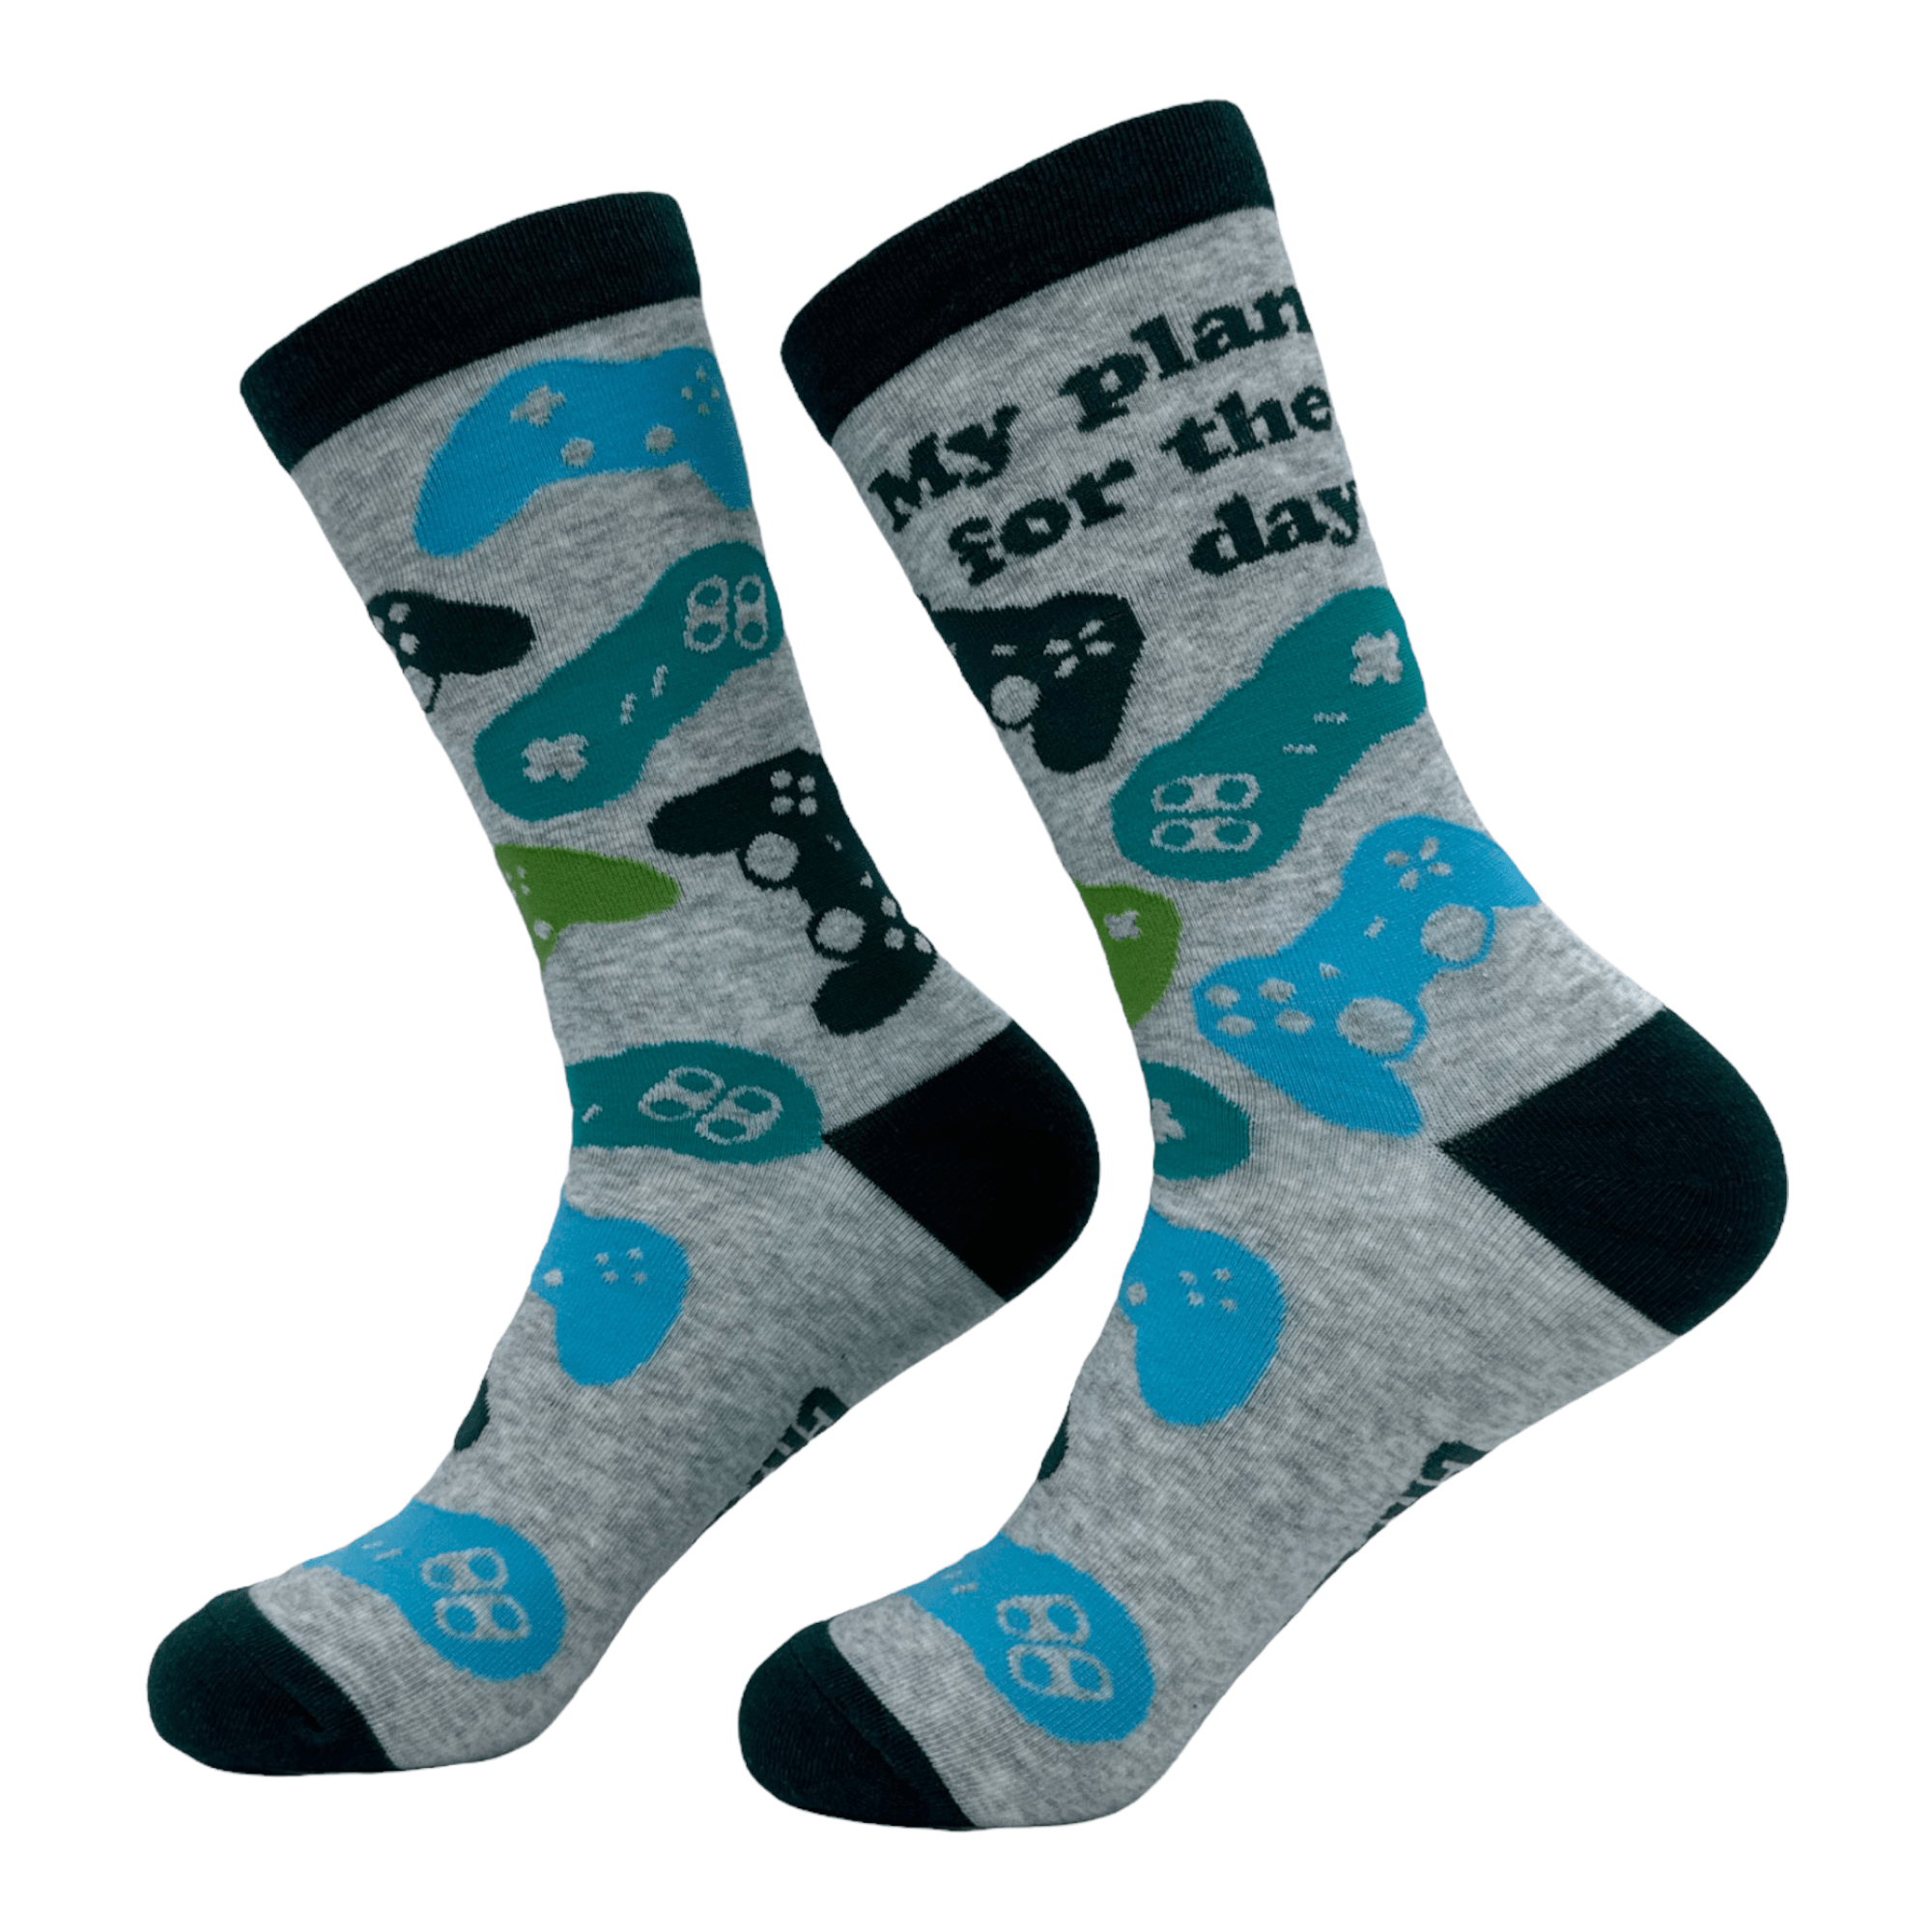 Women's My Plan For The Day Socks  -  Crazy Dog T-Shirts